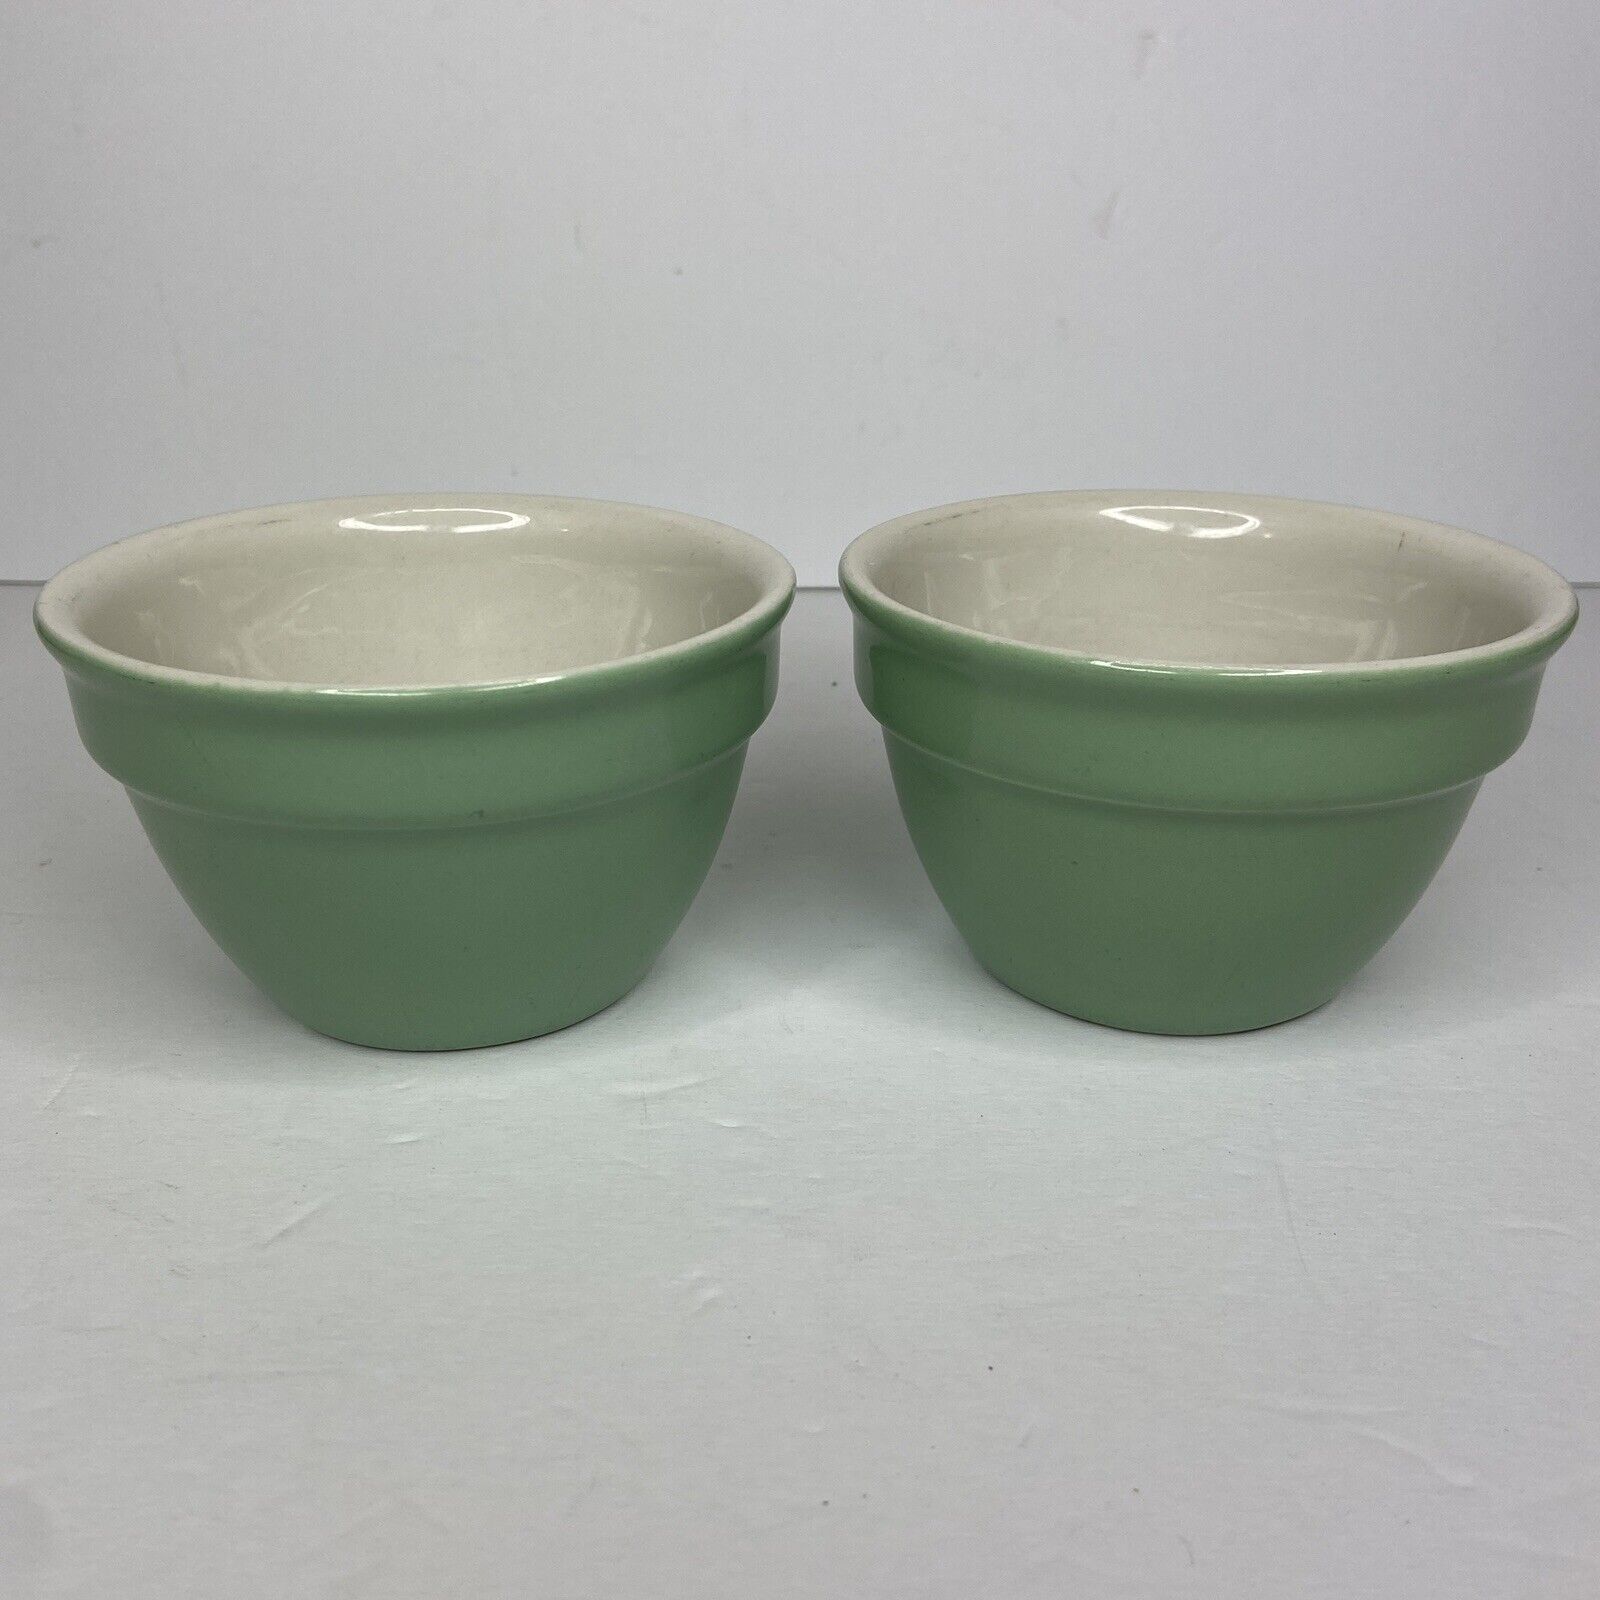 Vintage Hall 1092 Mint Green Beehive Serving Bowls 3 in US Set of 2 Farmhouse